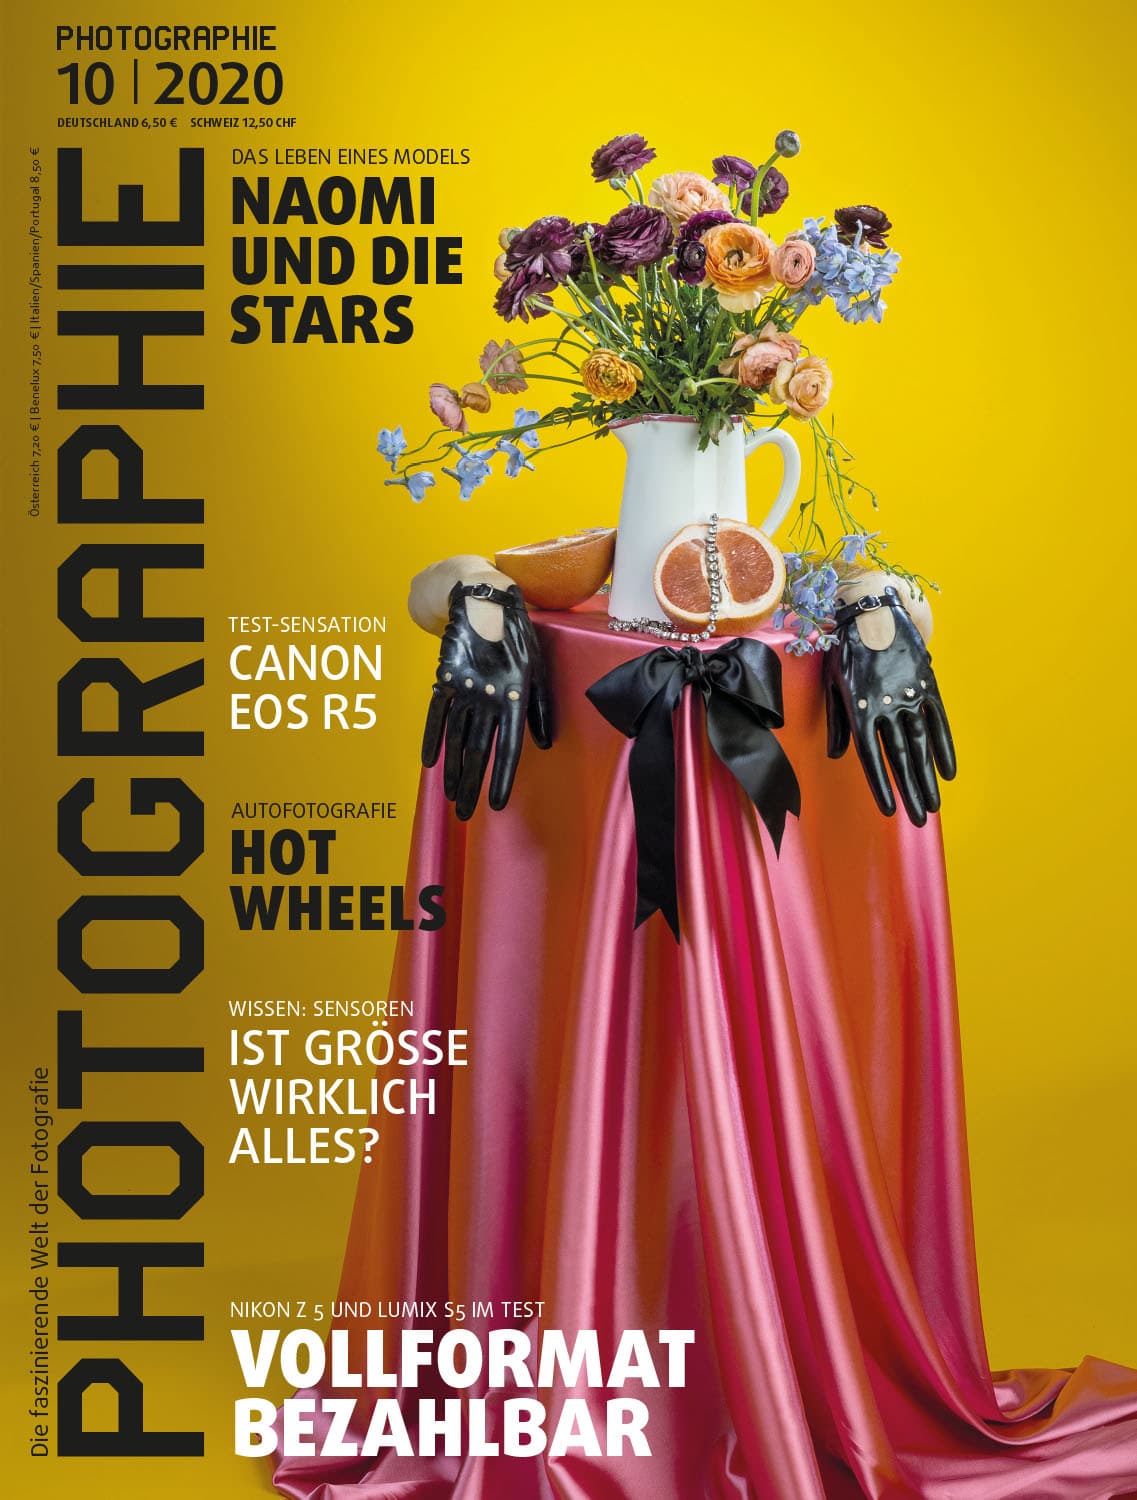 PHOTOGRAPHIE Digitales Magazin 10 2020 Cover